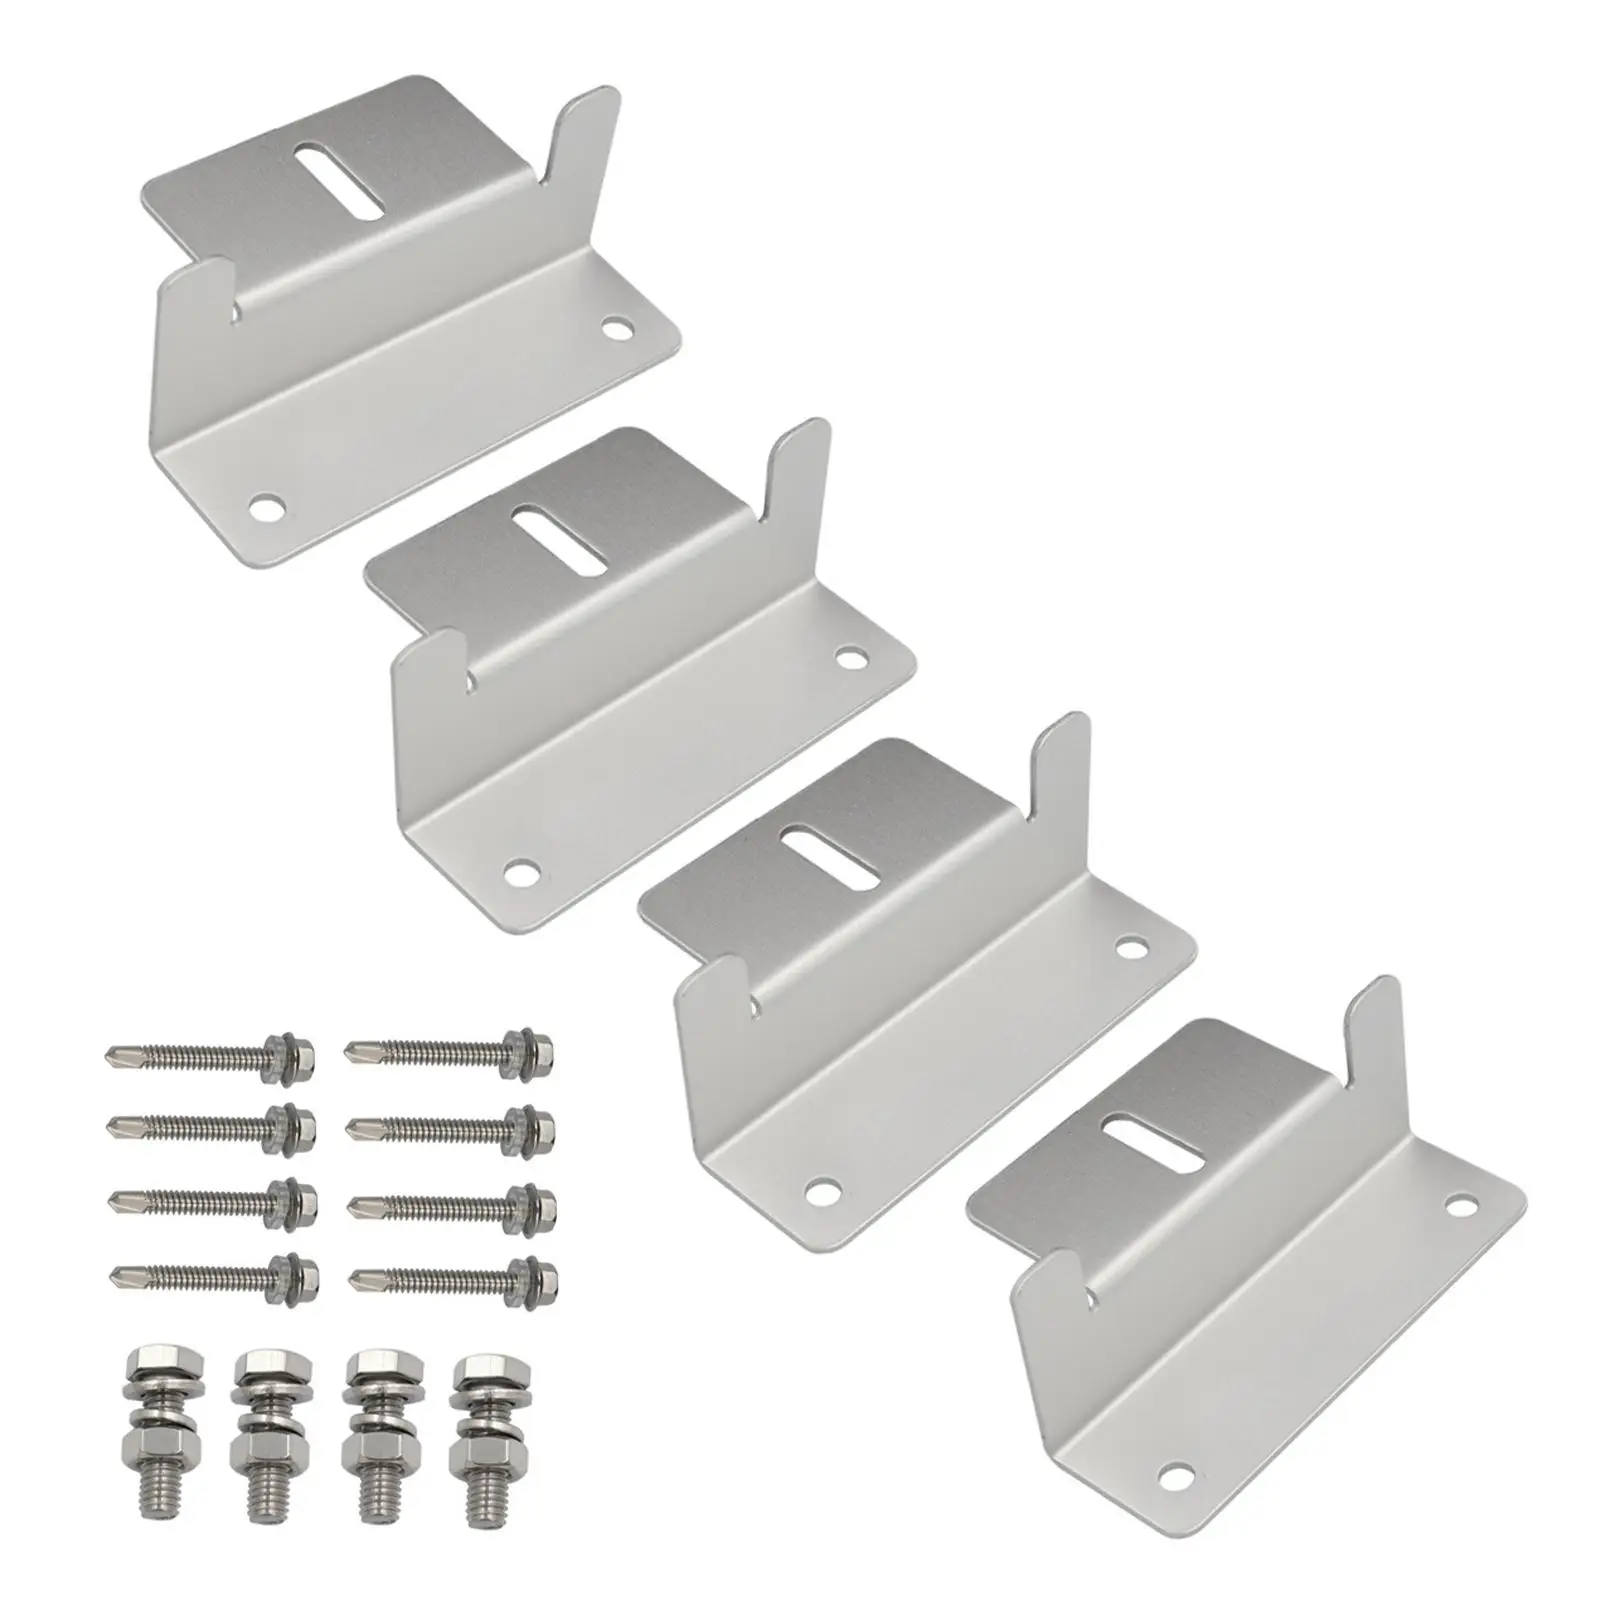 Solar Panel Mounting Brackets Aluminum Alloy Quality with Nuts and Bolts Install Accessories for Off Grid Trailers Yacht RV